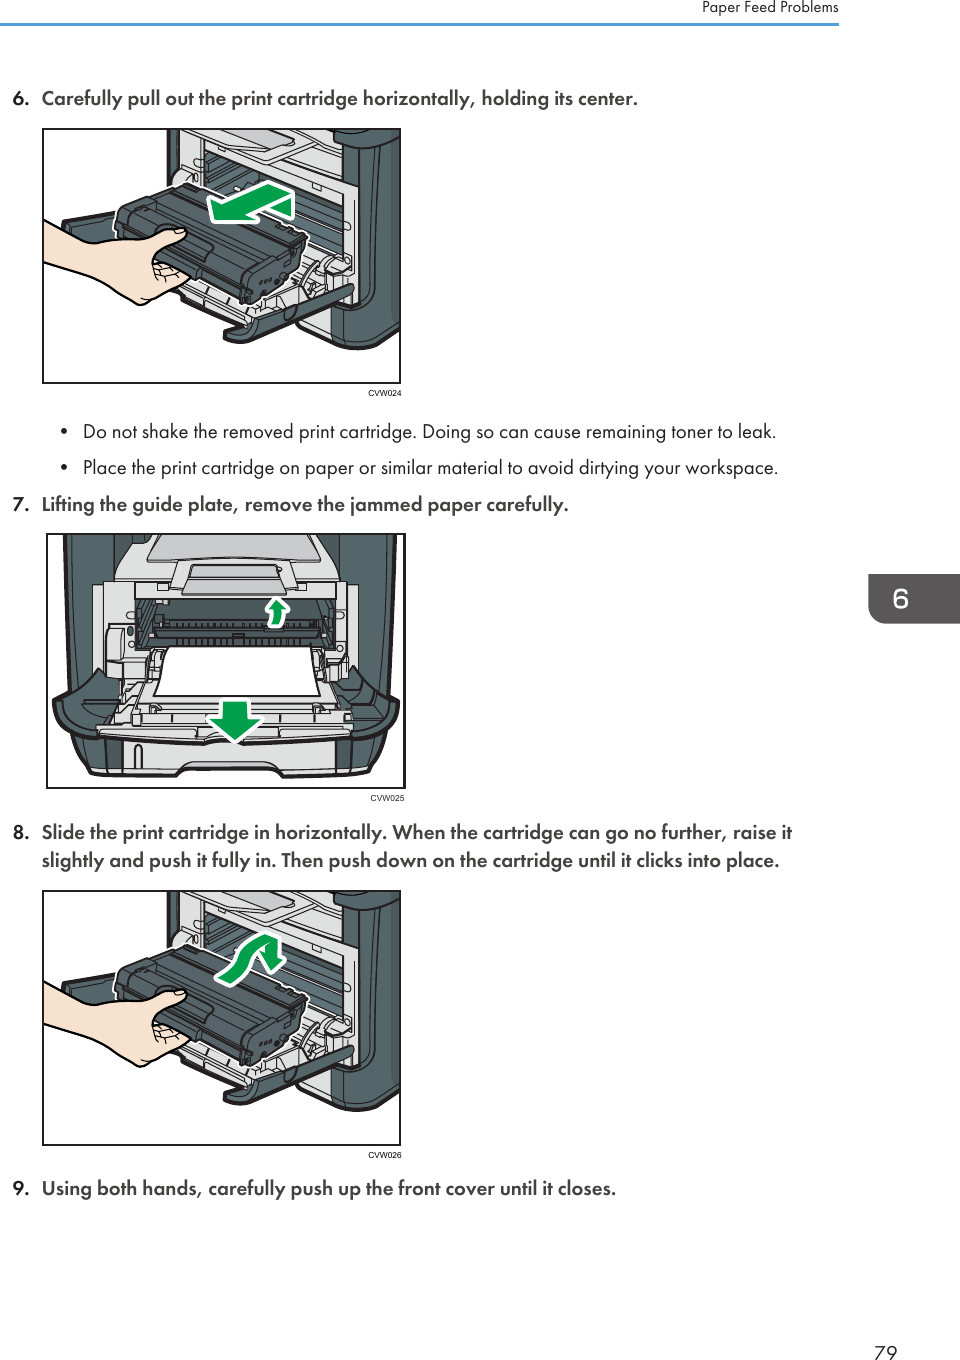 6. Carefully pull out the print cartridge horizontally, holding its center.CVW024• Do not shake the removed print cartridge. Doing so can cause remaining toner to leak.•Place the print cartridge on paper or similar material to avoid dirtying your workspace.7. Lifting the guide plate, remove the jammed paper carefully.CVW0258. Slide the print cartridge in horizontally. When the cartridge can go no further, raise itslightly and push it fully in. Then push down on the cartridge until it clicks into place.CVW0269. Using both hands, carefully push up the front cover until it closes.Paper Feed Problems79